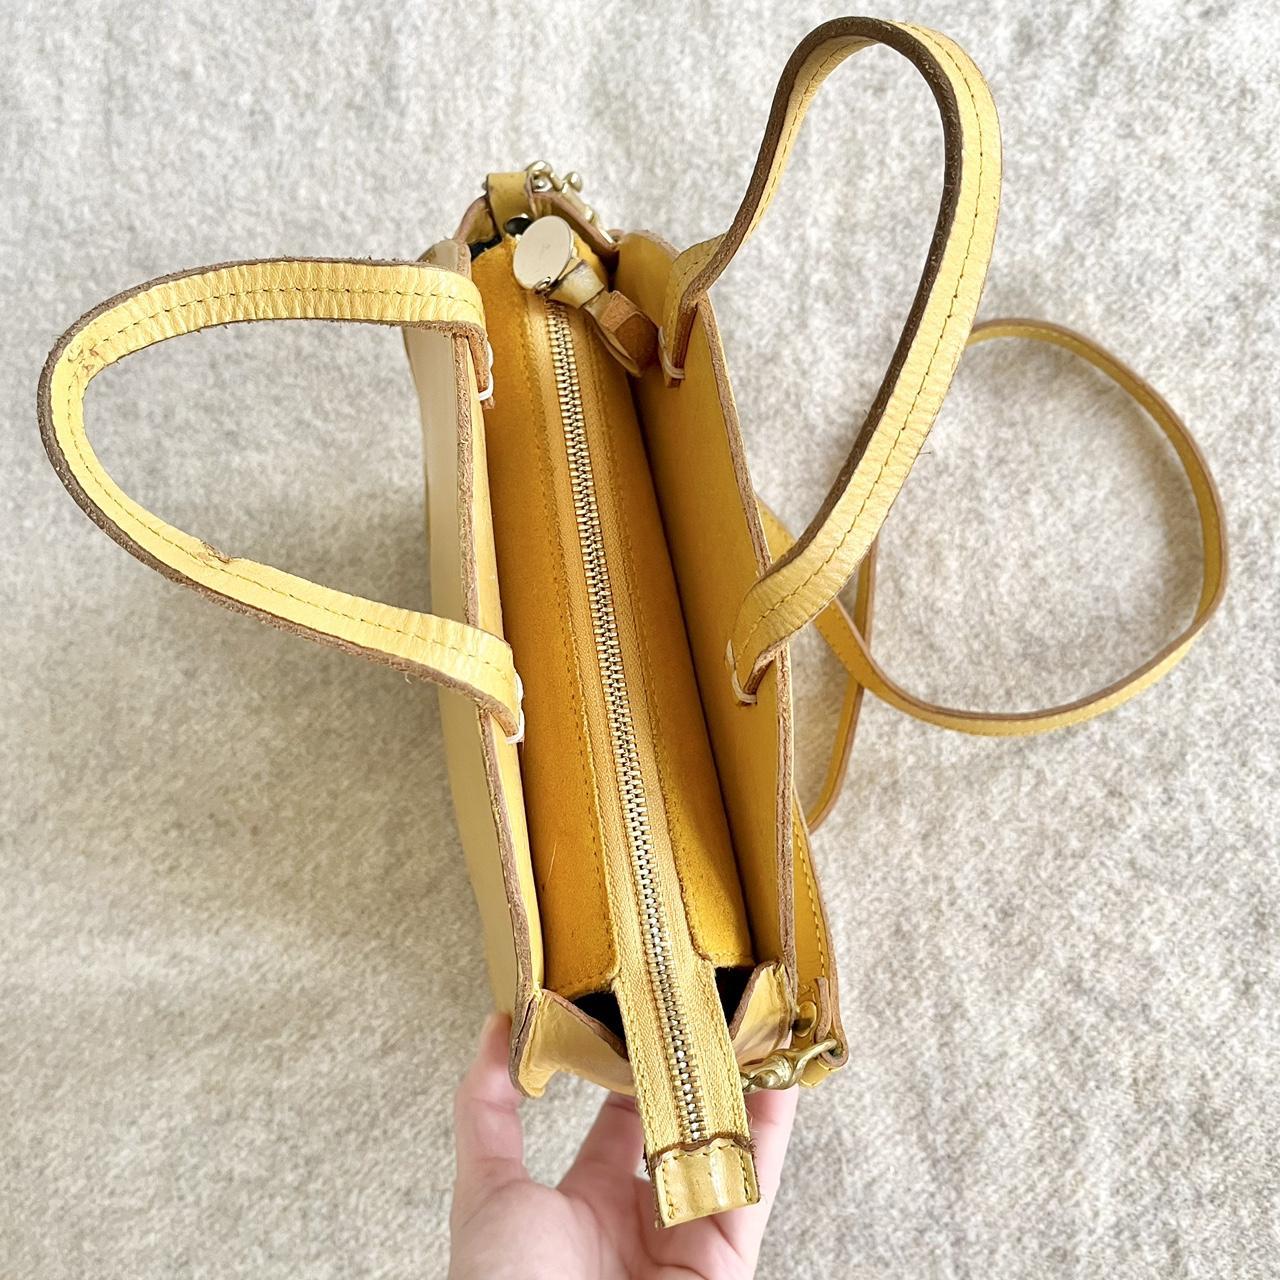 Yellow Petit Alistair Bag by Clare V. for $55